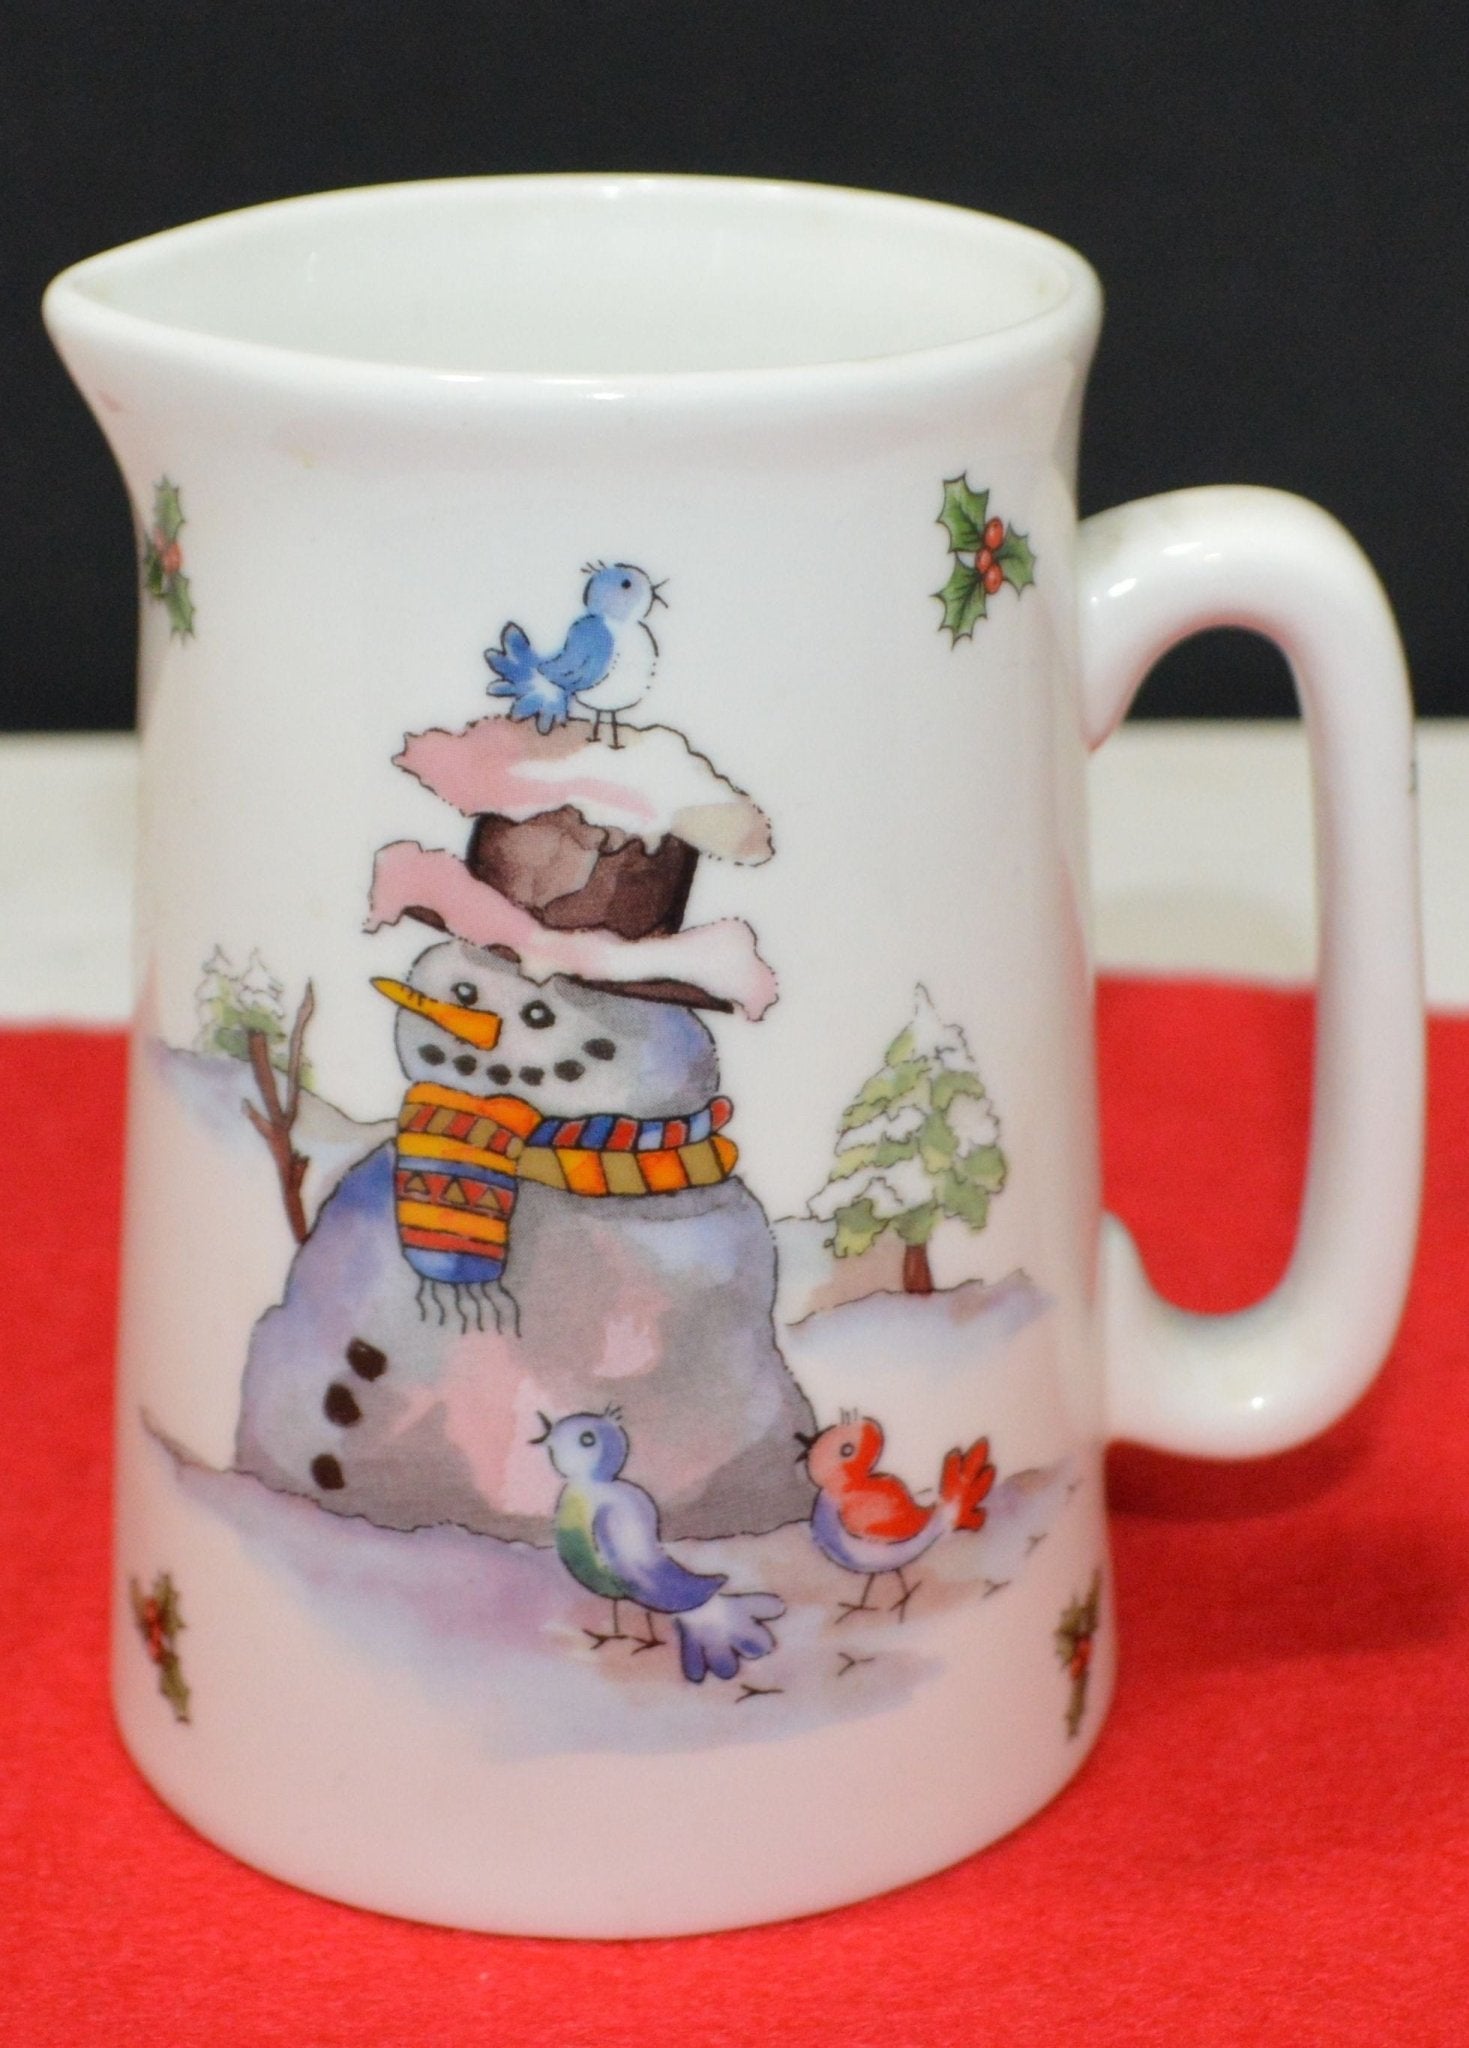 TABLEWARE JAMES DEAN POTTERY CHRISTMAS JUG DEPICTING A SNOWMAN AND HOLLY(PREVIOUSLY OWNED) VERY GOOD CONDITION - TMD167207